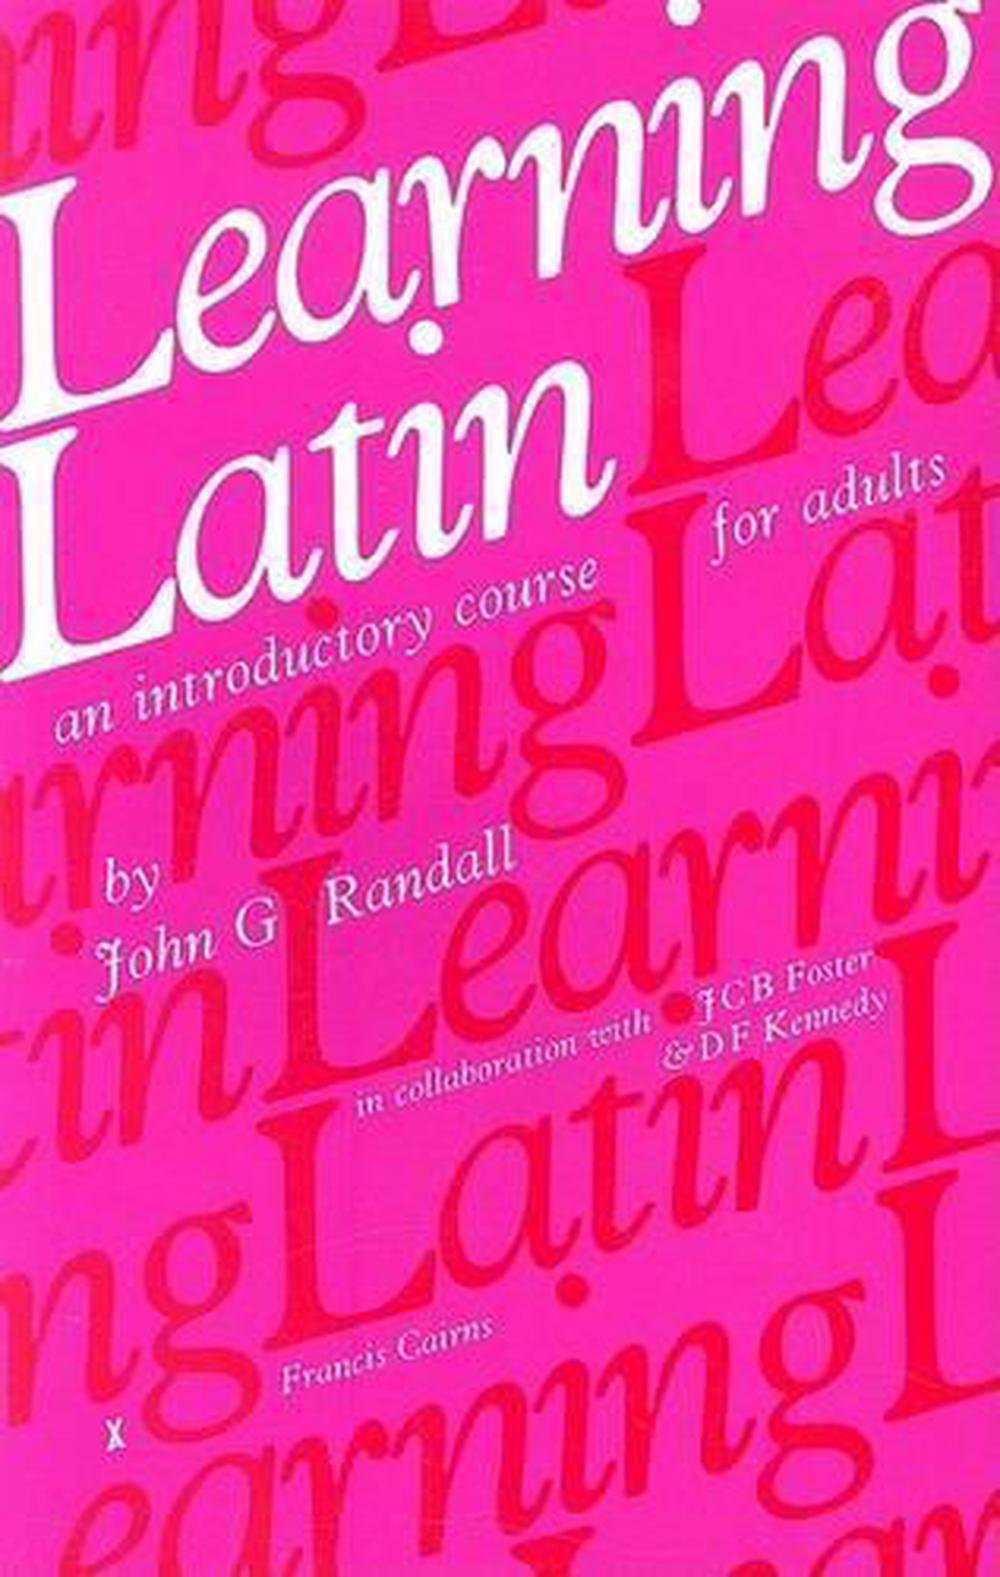 Learning Latin An Introductory Course For Adults By J G Randall